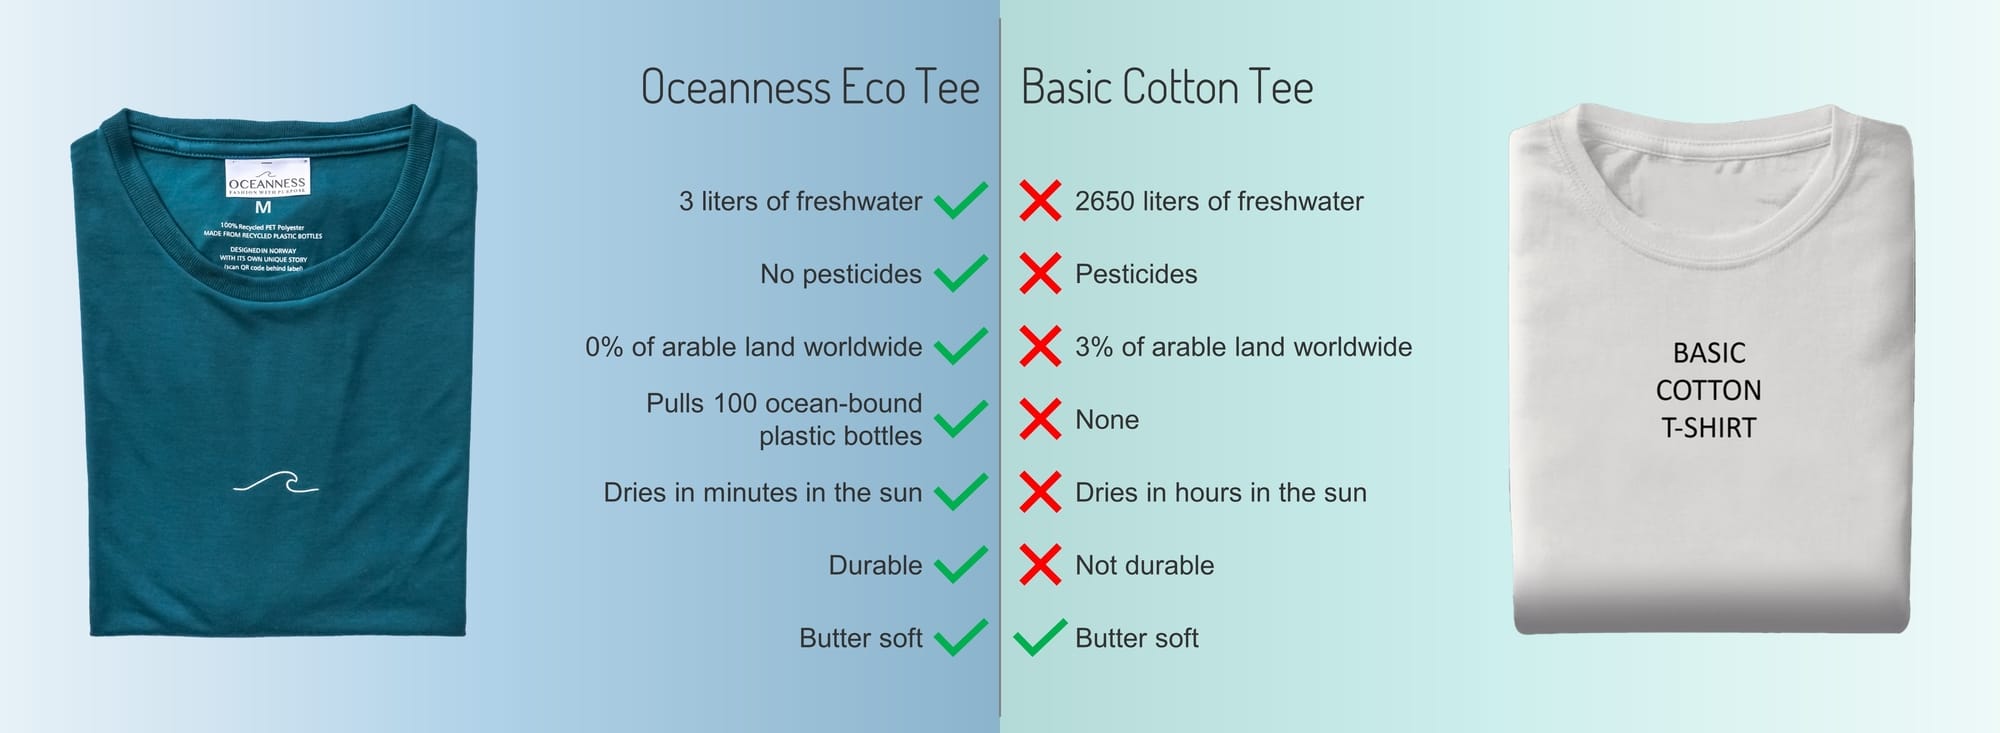 Oceanness t-shirt made from recycled plastic bottles (recycled polyester) versus cotton t-shirt